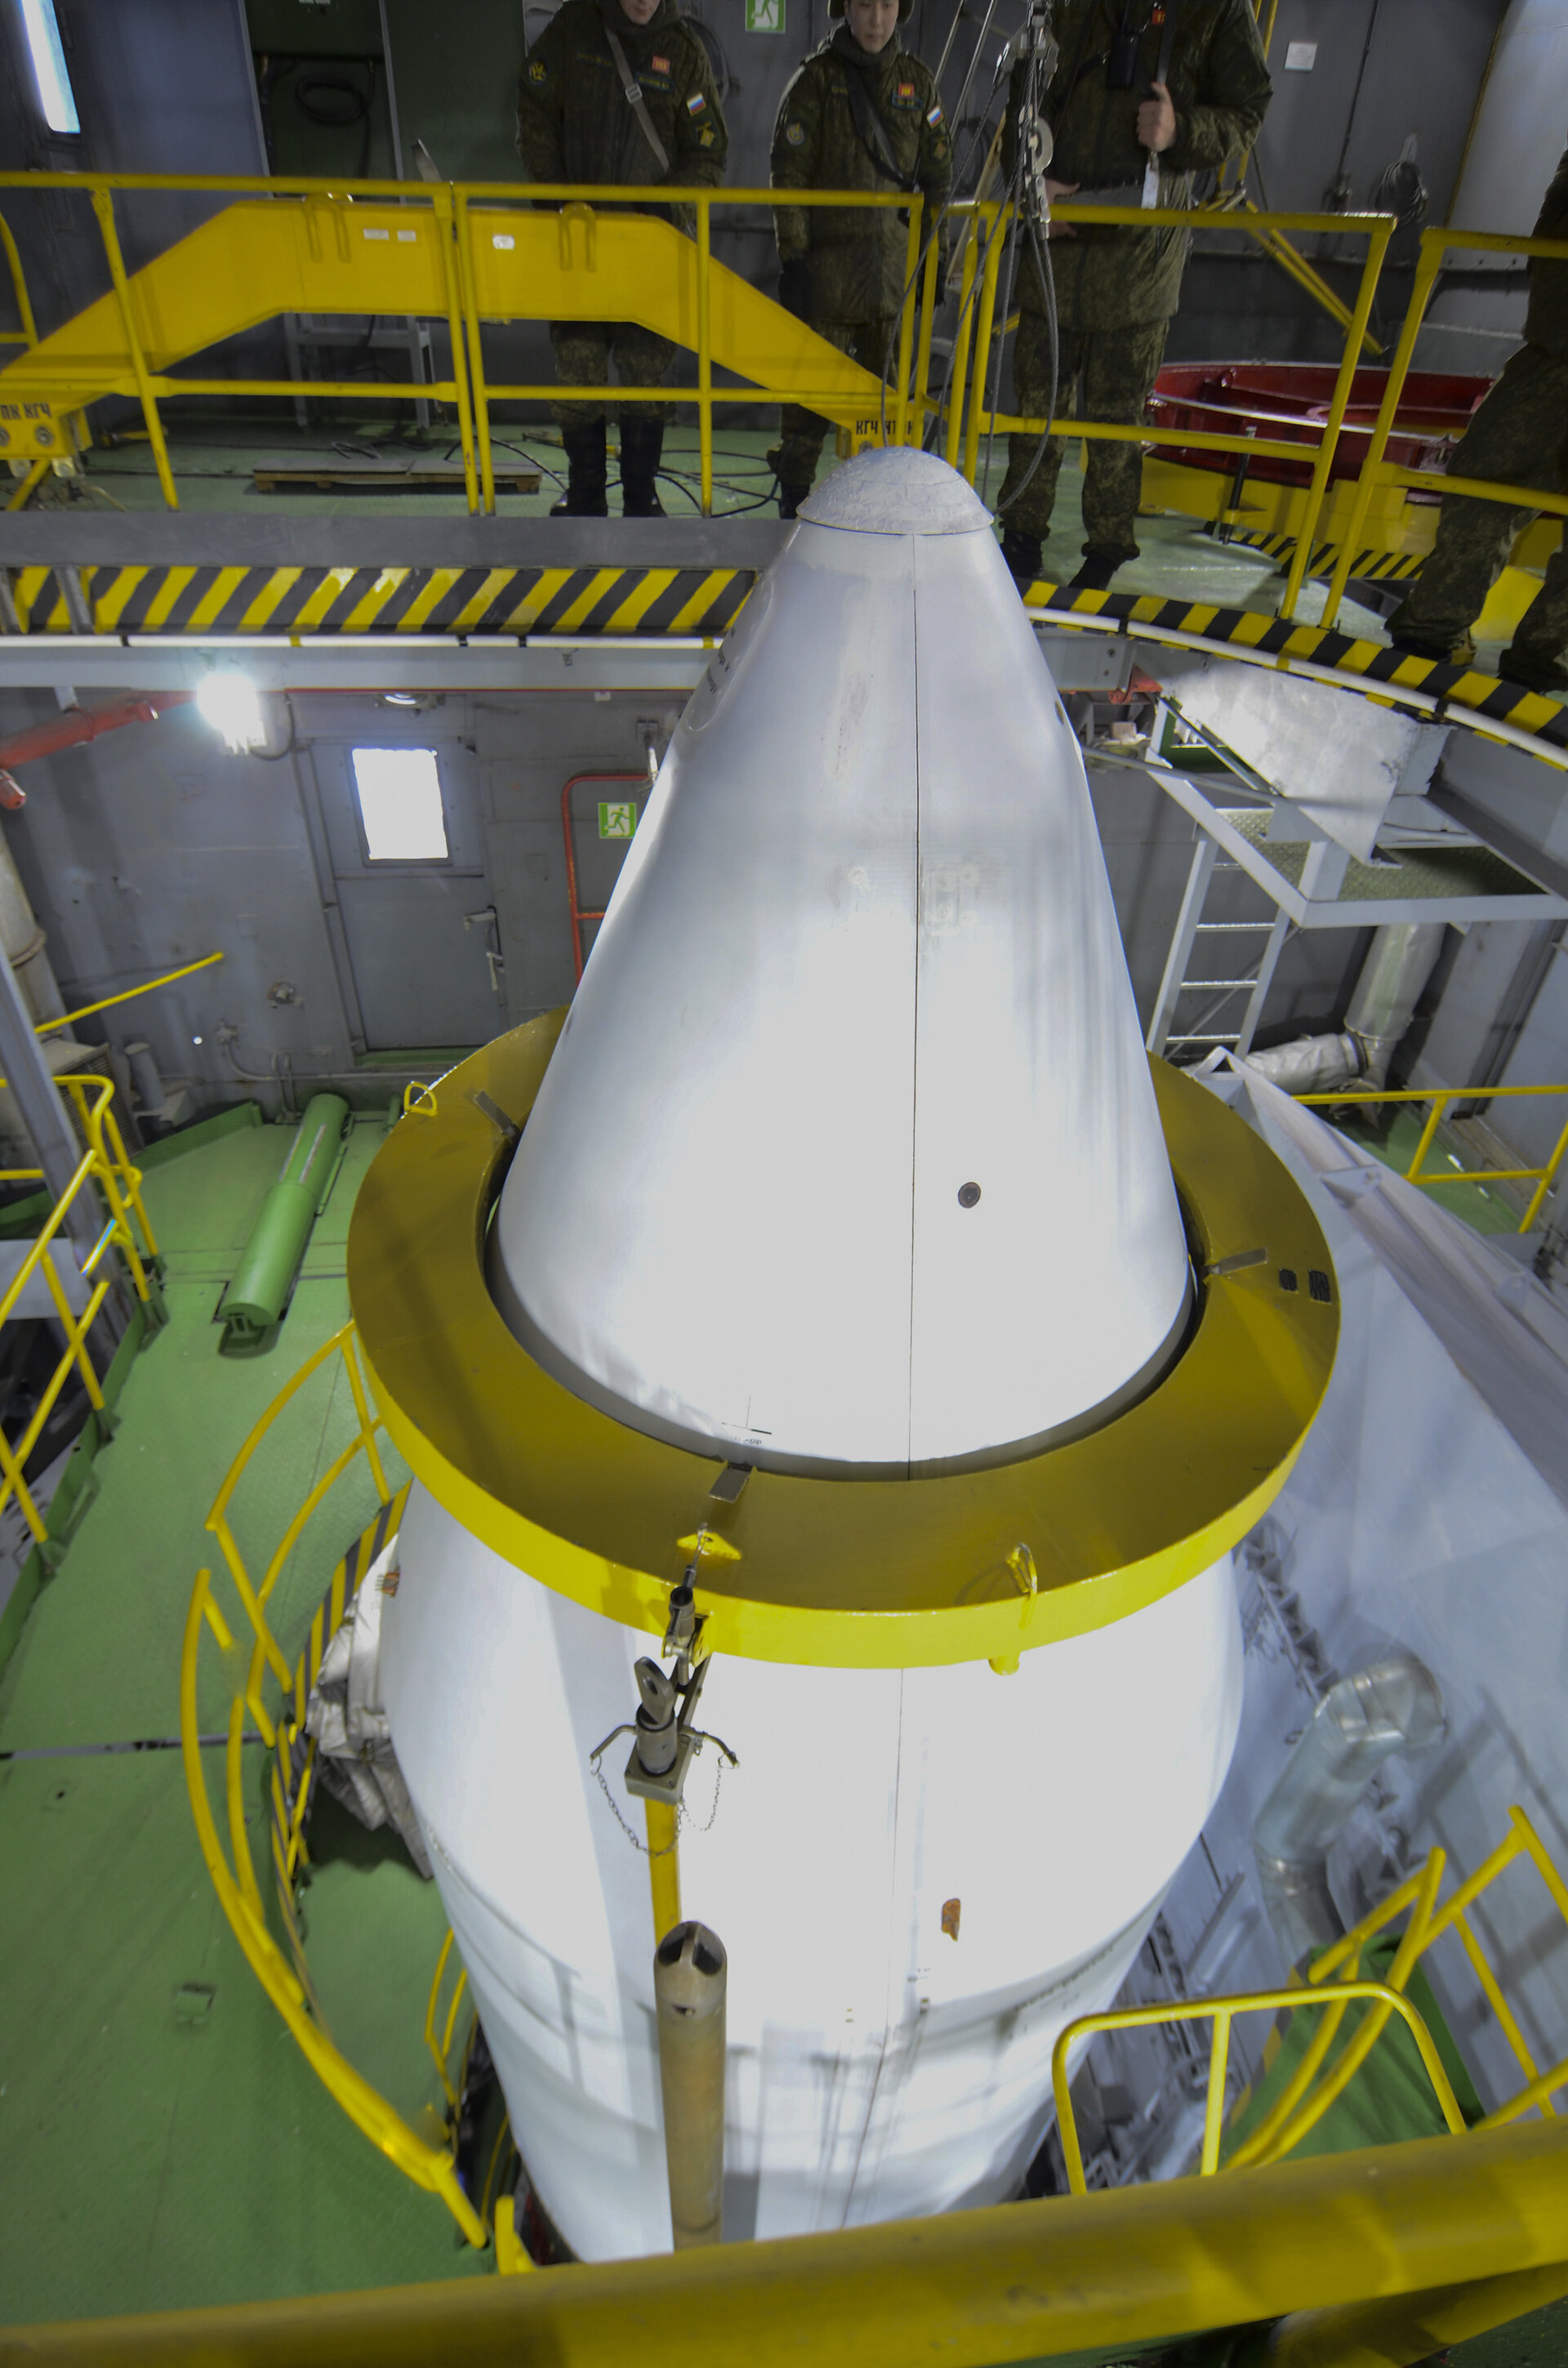 Sentinel-3A upper composite integrated on top of the Rockot launcher